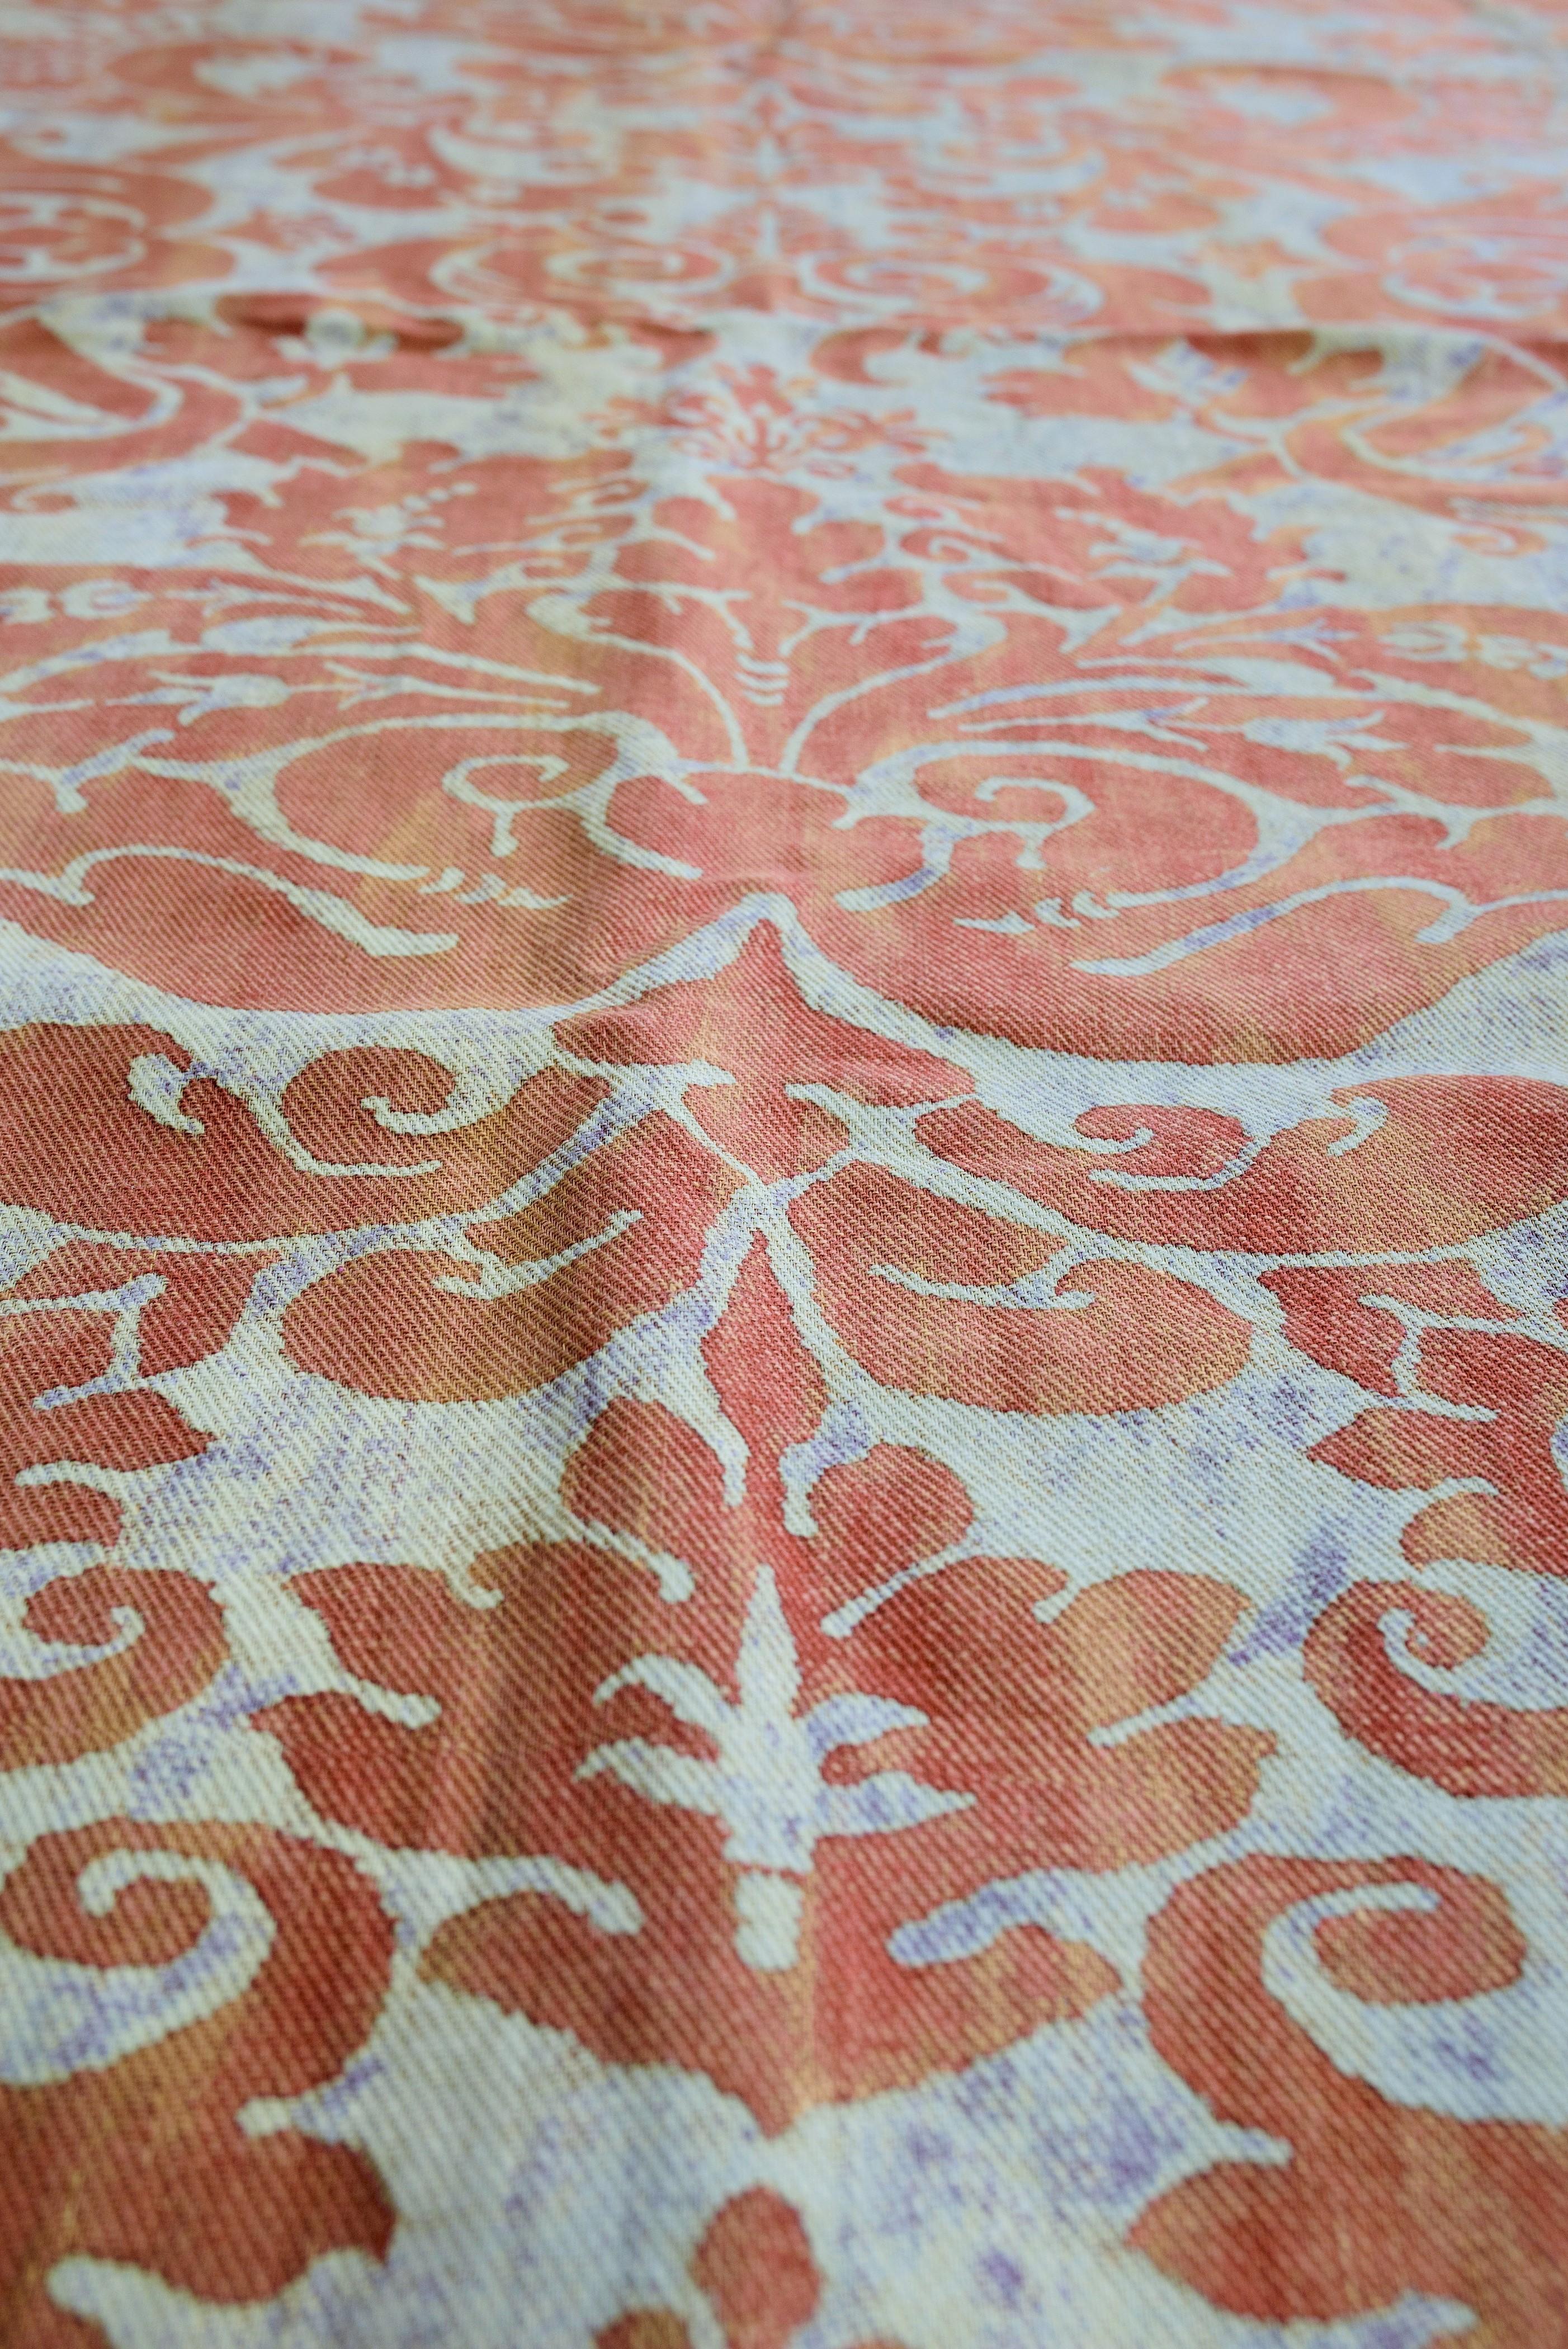 A Mariano Fortuny Printed Cotton Fabric - Italy Circa 1940 For Sale 3